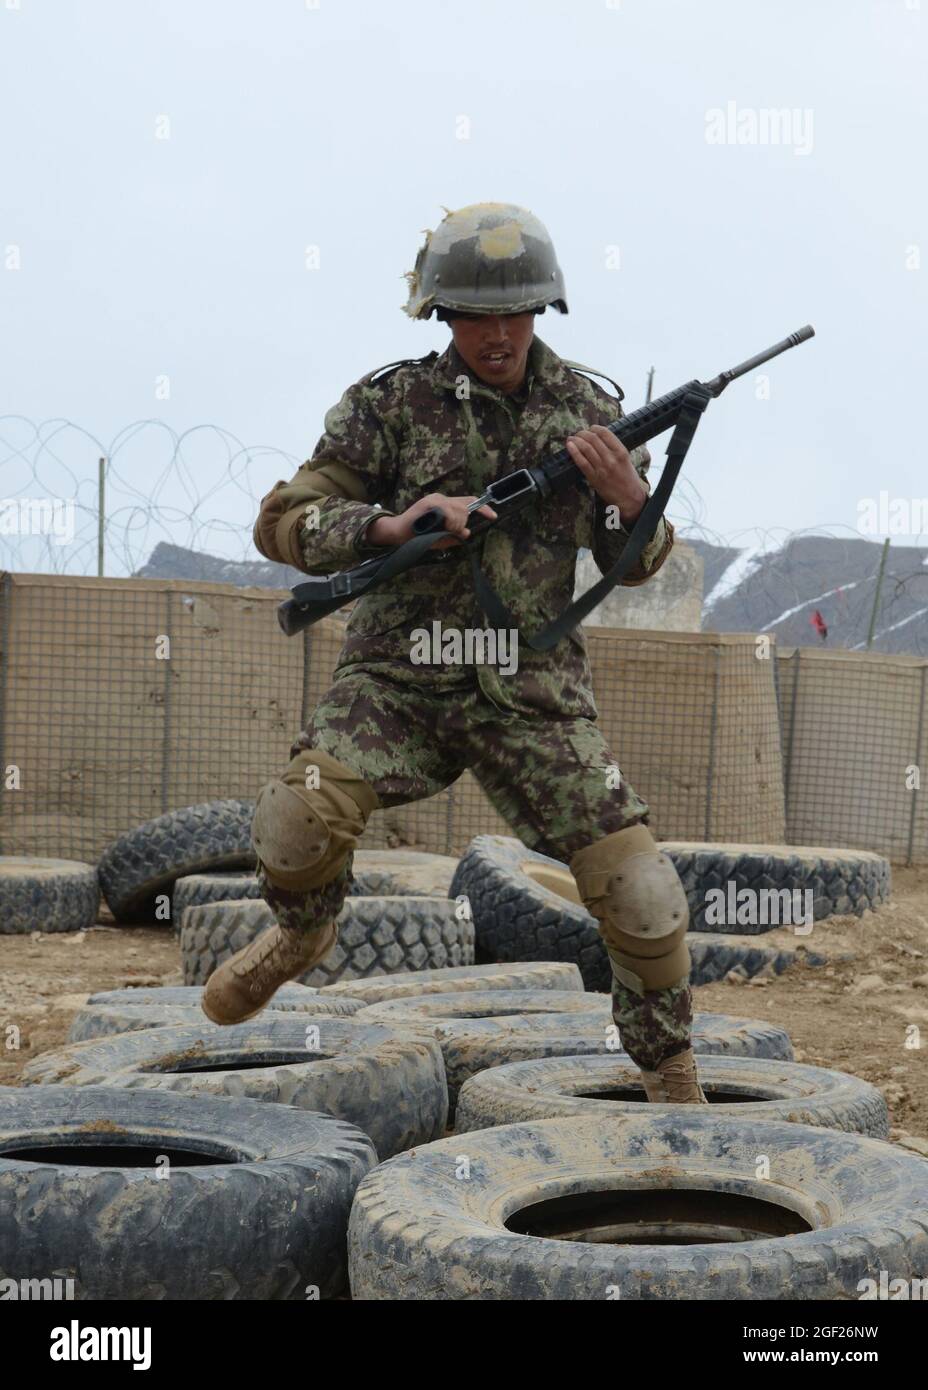 PAKTYA PROVINCE, Afghanistan –An Afghan National Army basic trainee runs through tires during an obstacle course at the Regional Military Training Center of Gardez, Feb. 25, 2013. The nine-week basic training course will graduate approximately 600 future ANA soldiers. (U.S. Army photo by Spc. Tianna Waite, 115th Mobile Public Affairs Detachment) Stock Photo